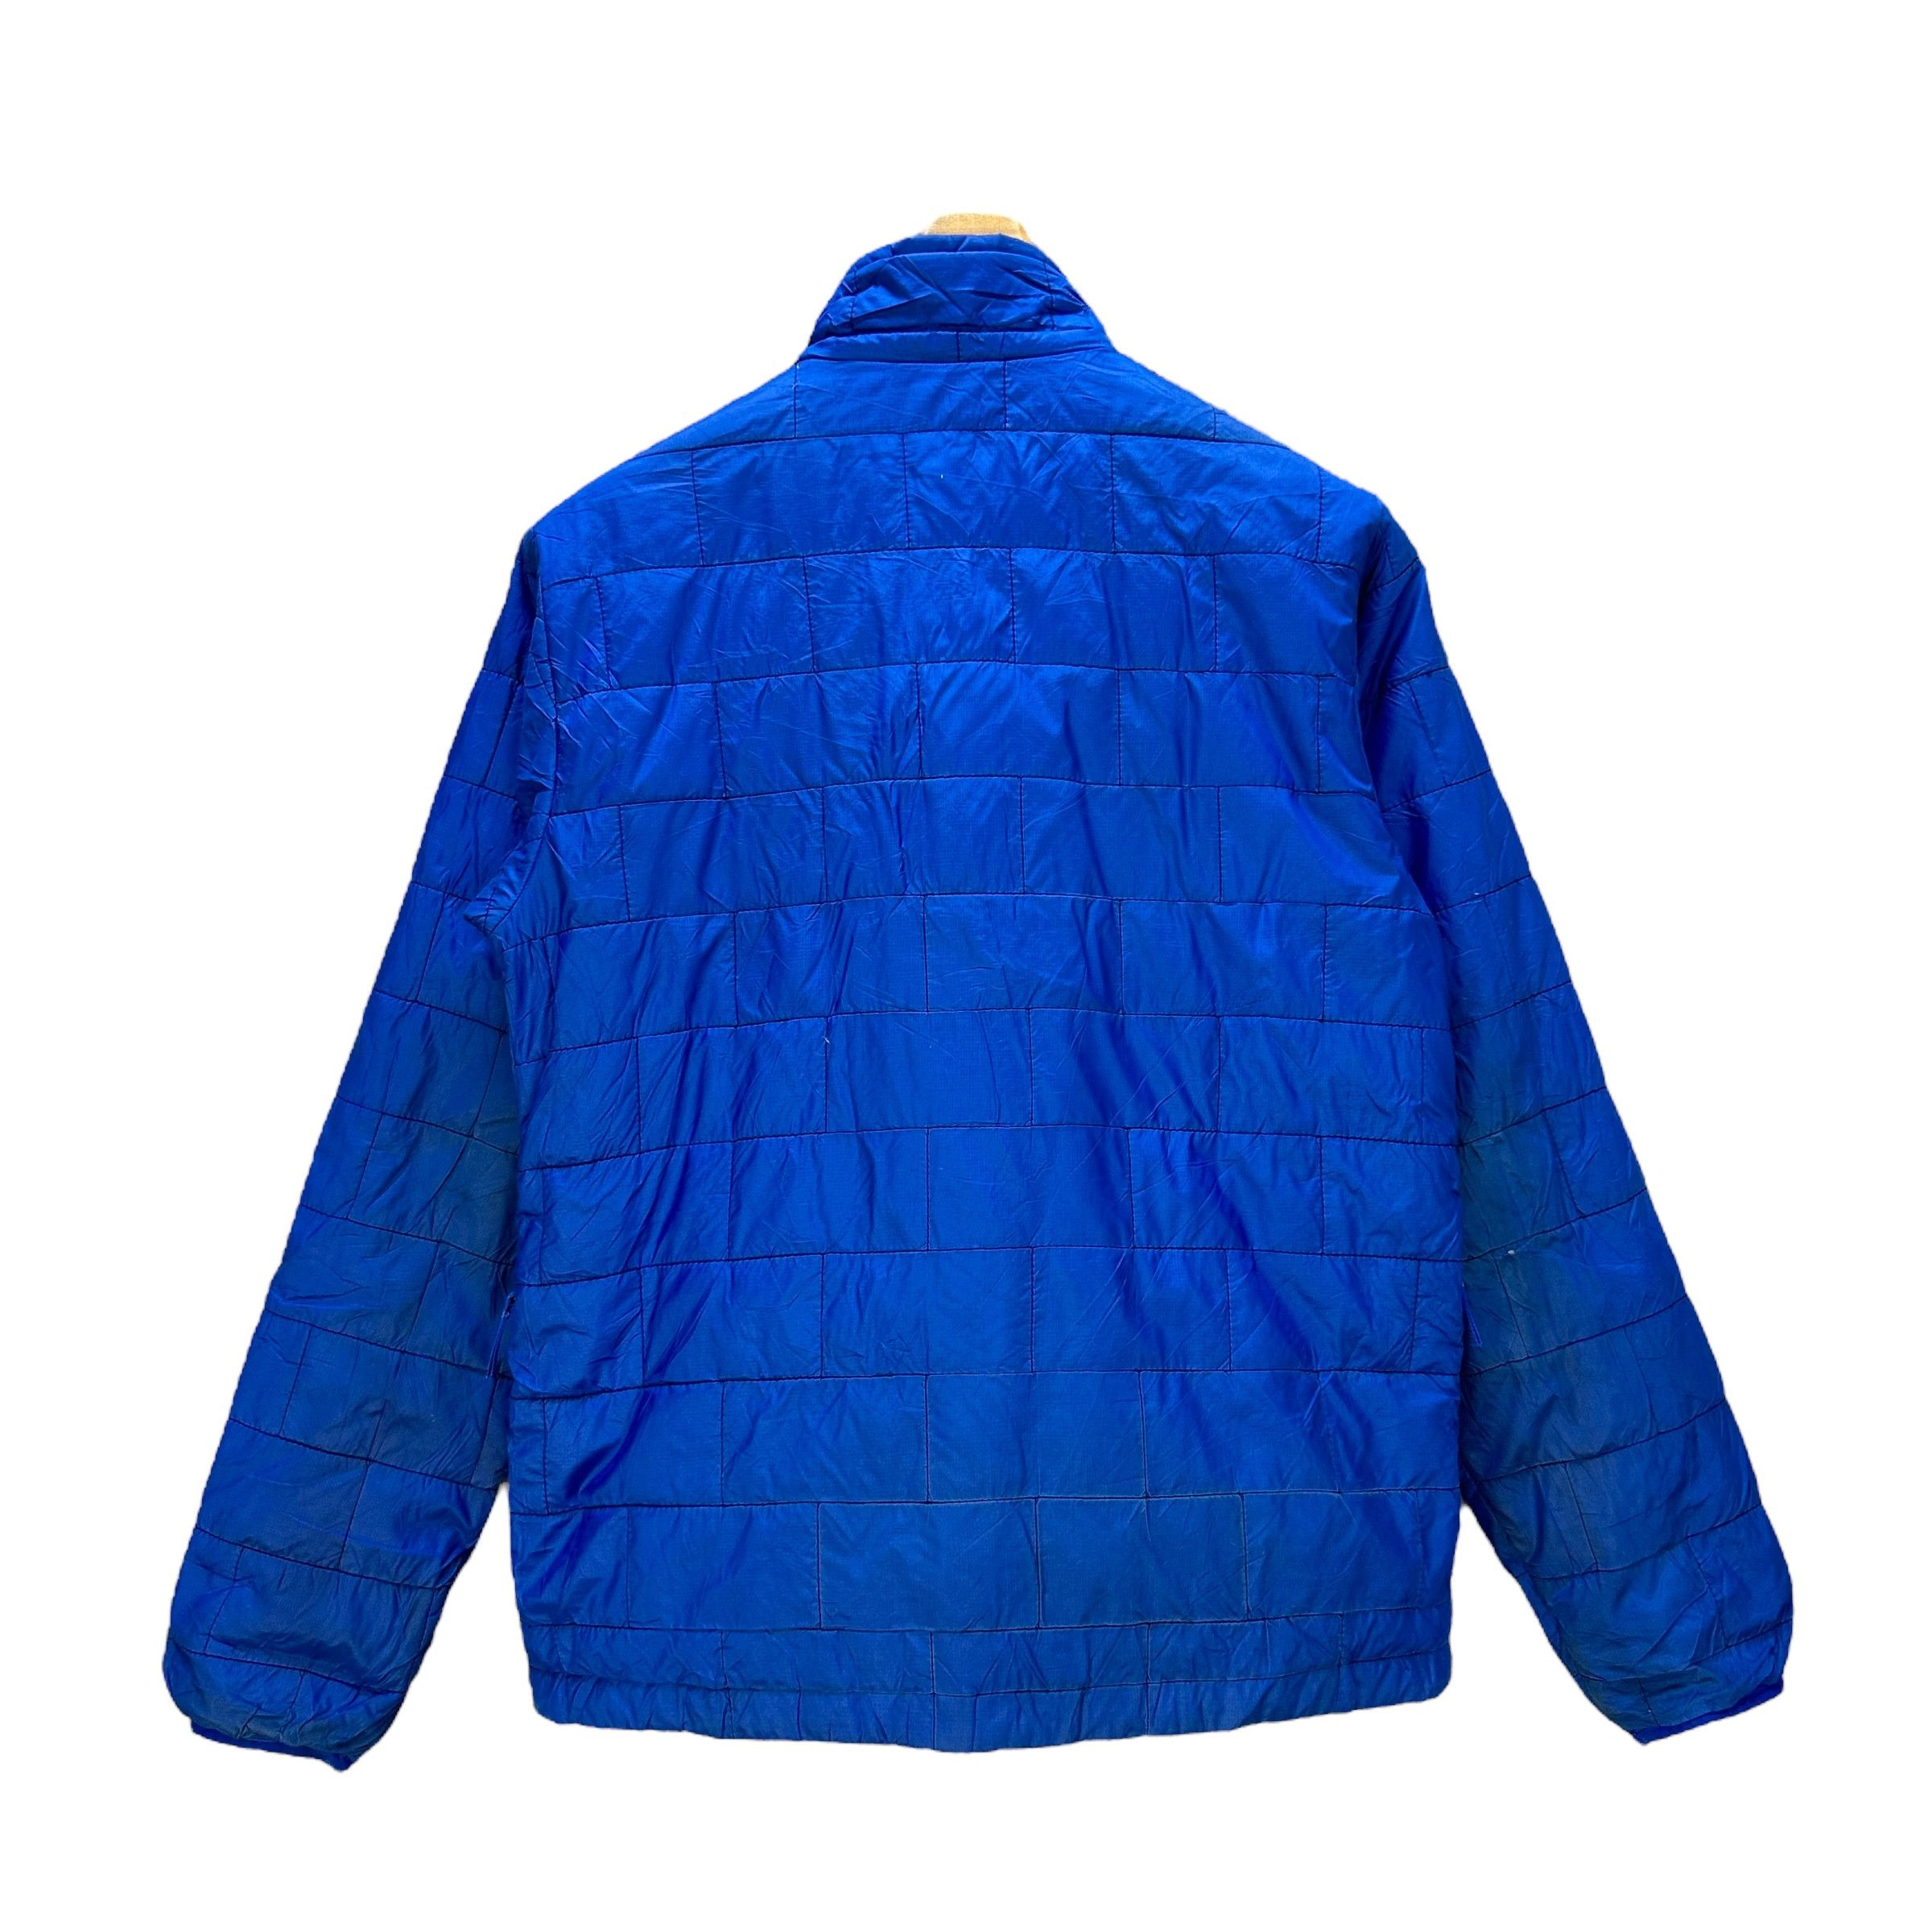 PATAGONIA LIGHT PUFFER JACKET IN BLUE FOR KIDS #9020-48 - 15